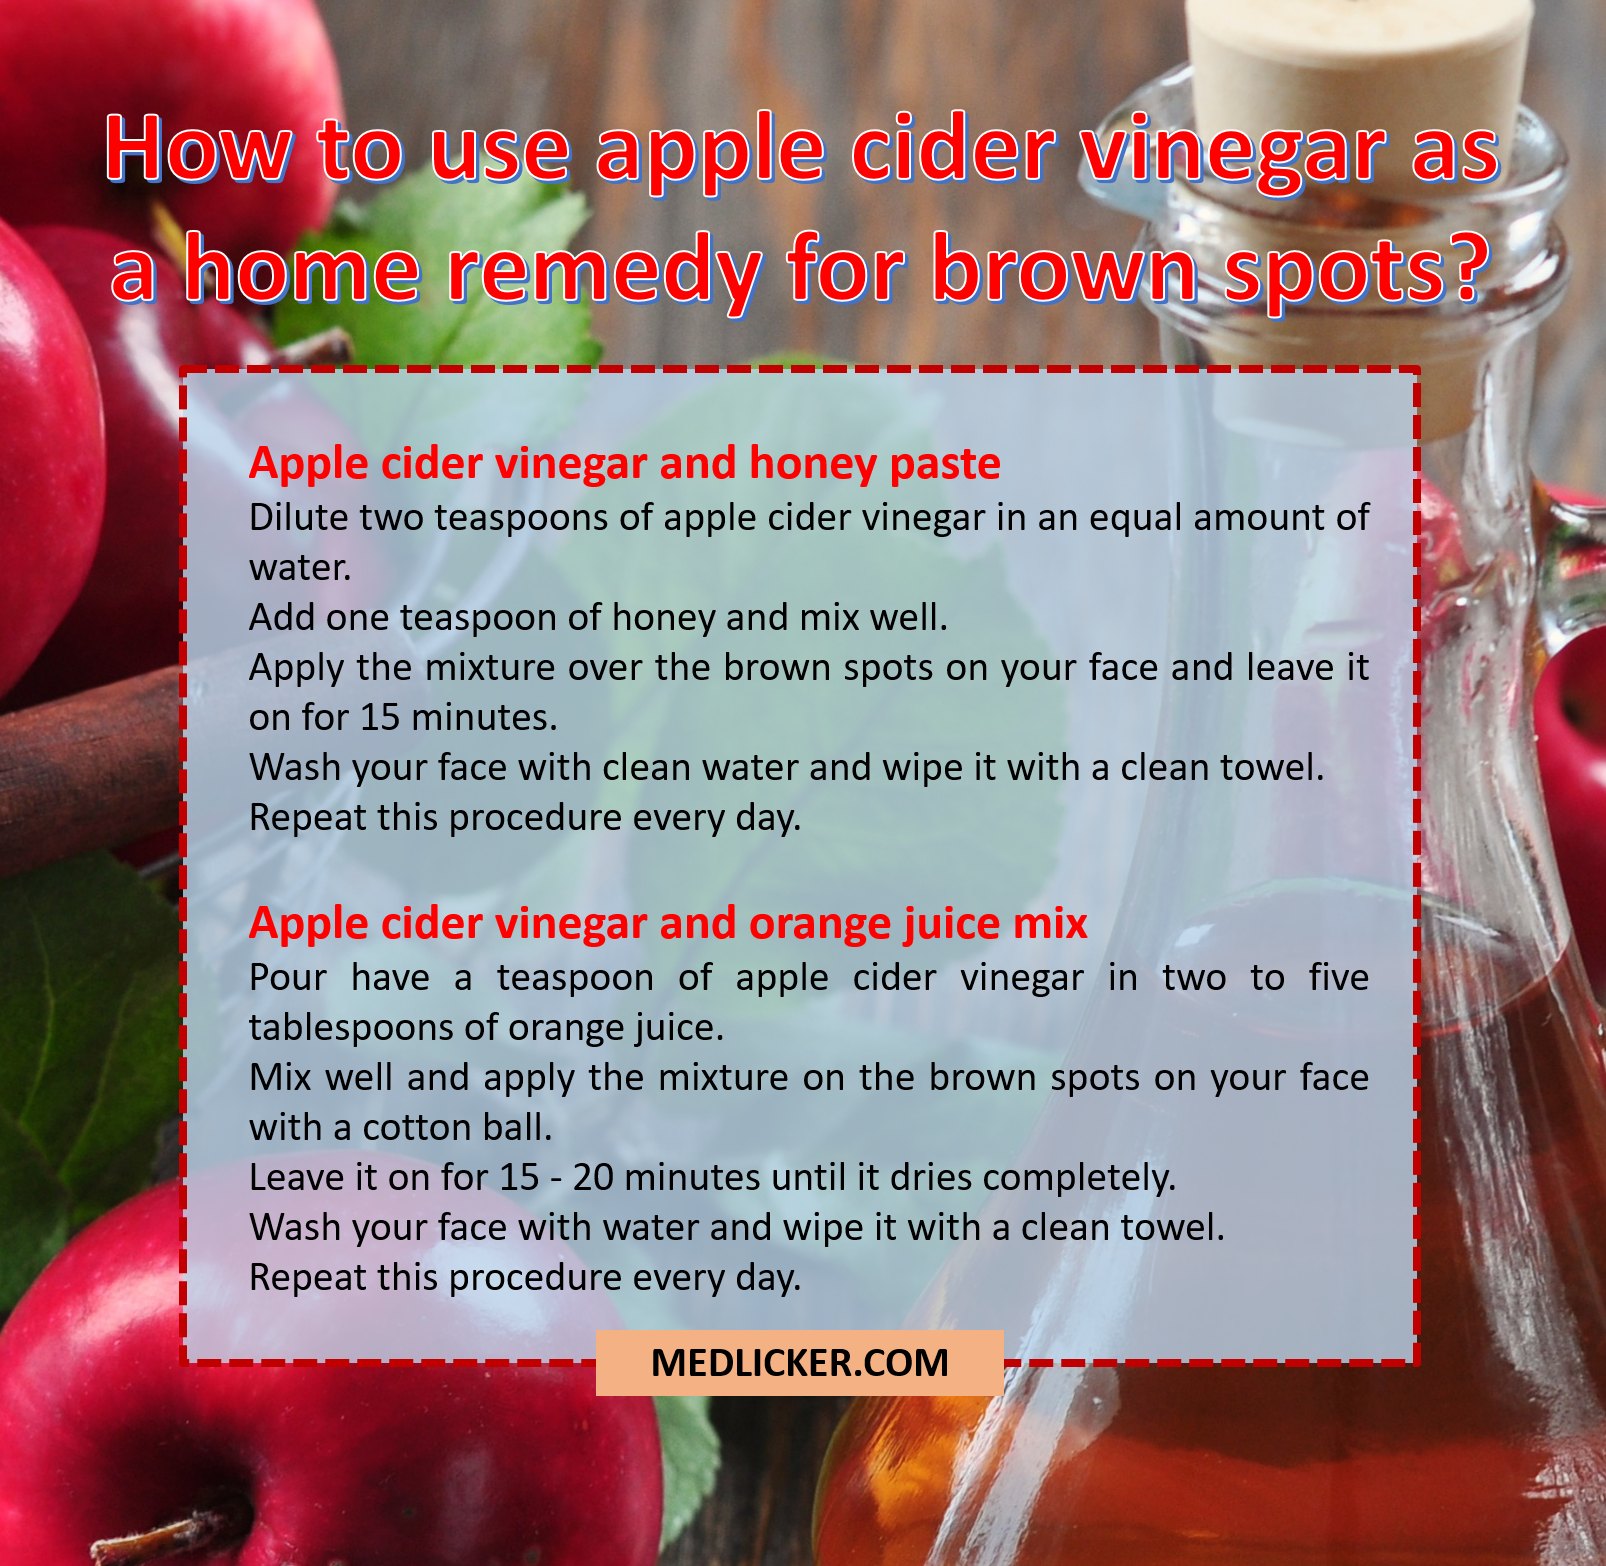 How to use apple cider vinegar to deal with brown spots on your face?